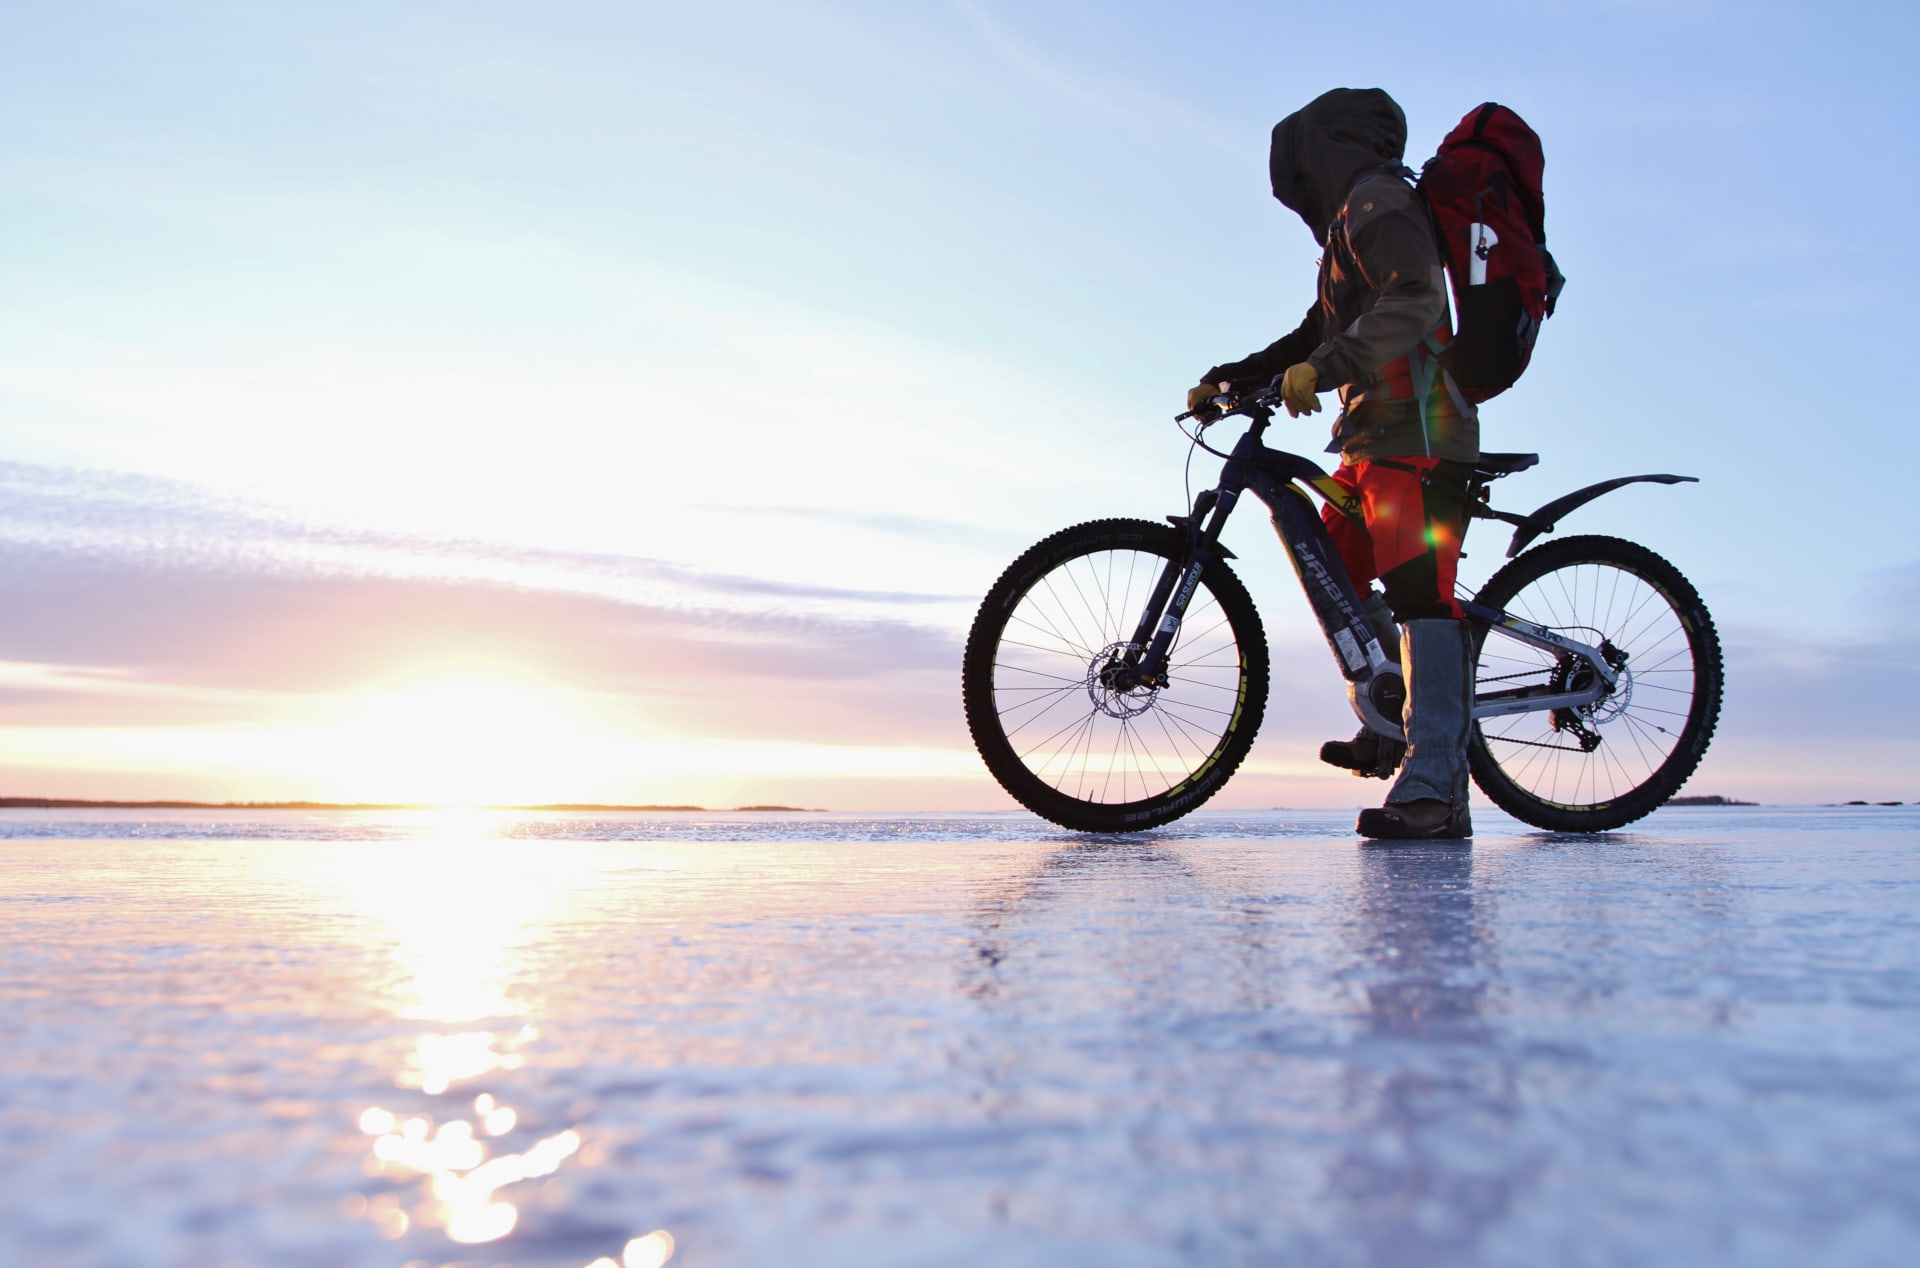 Cycling on the ice